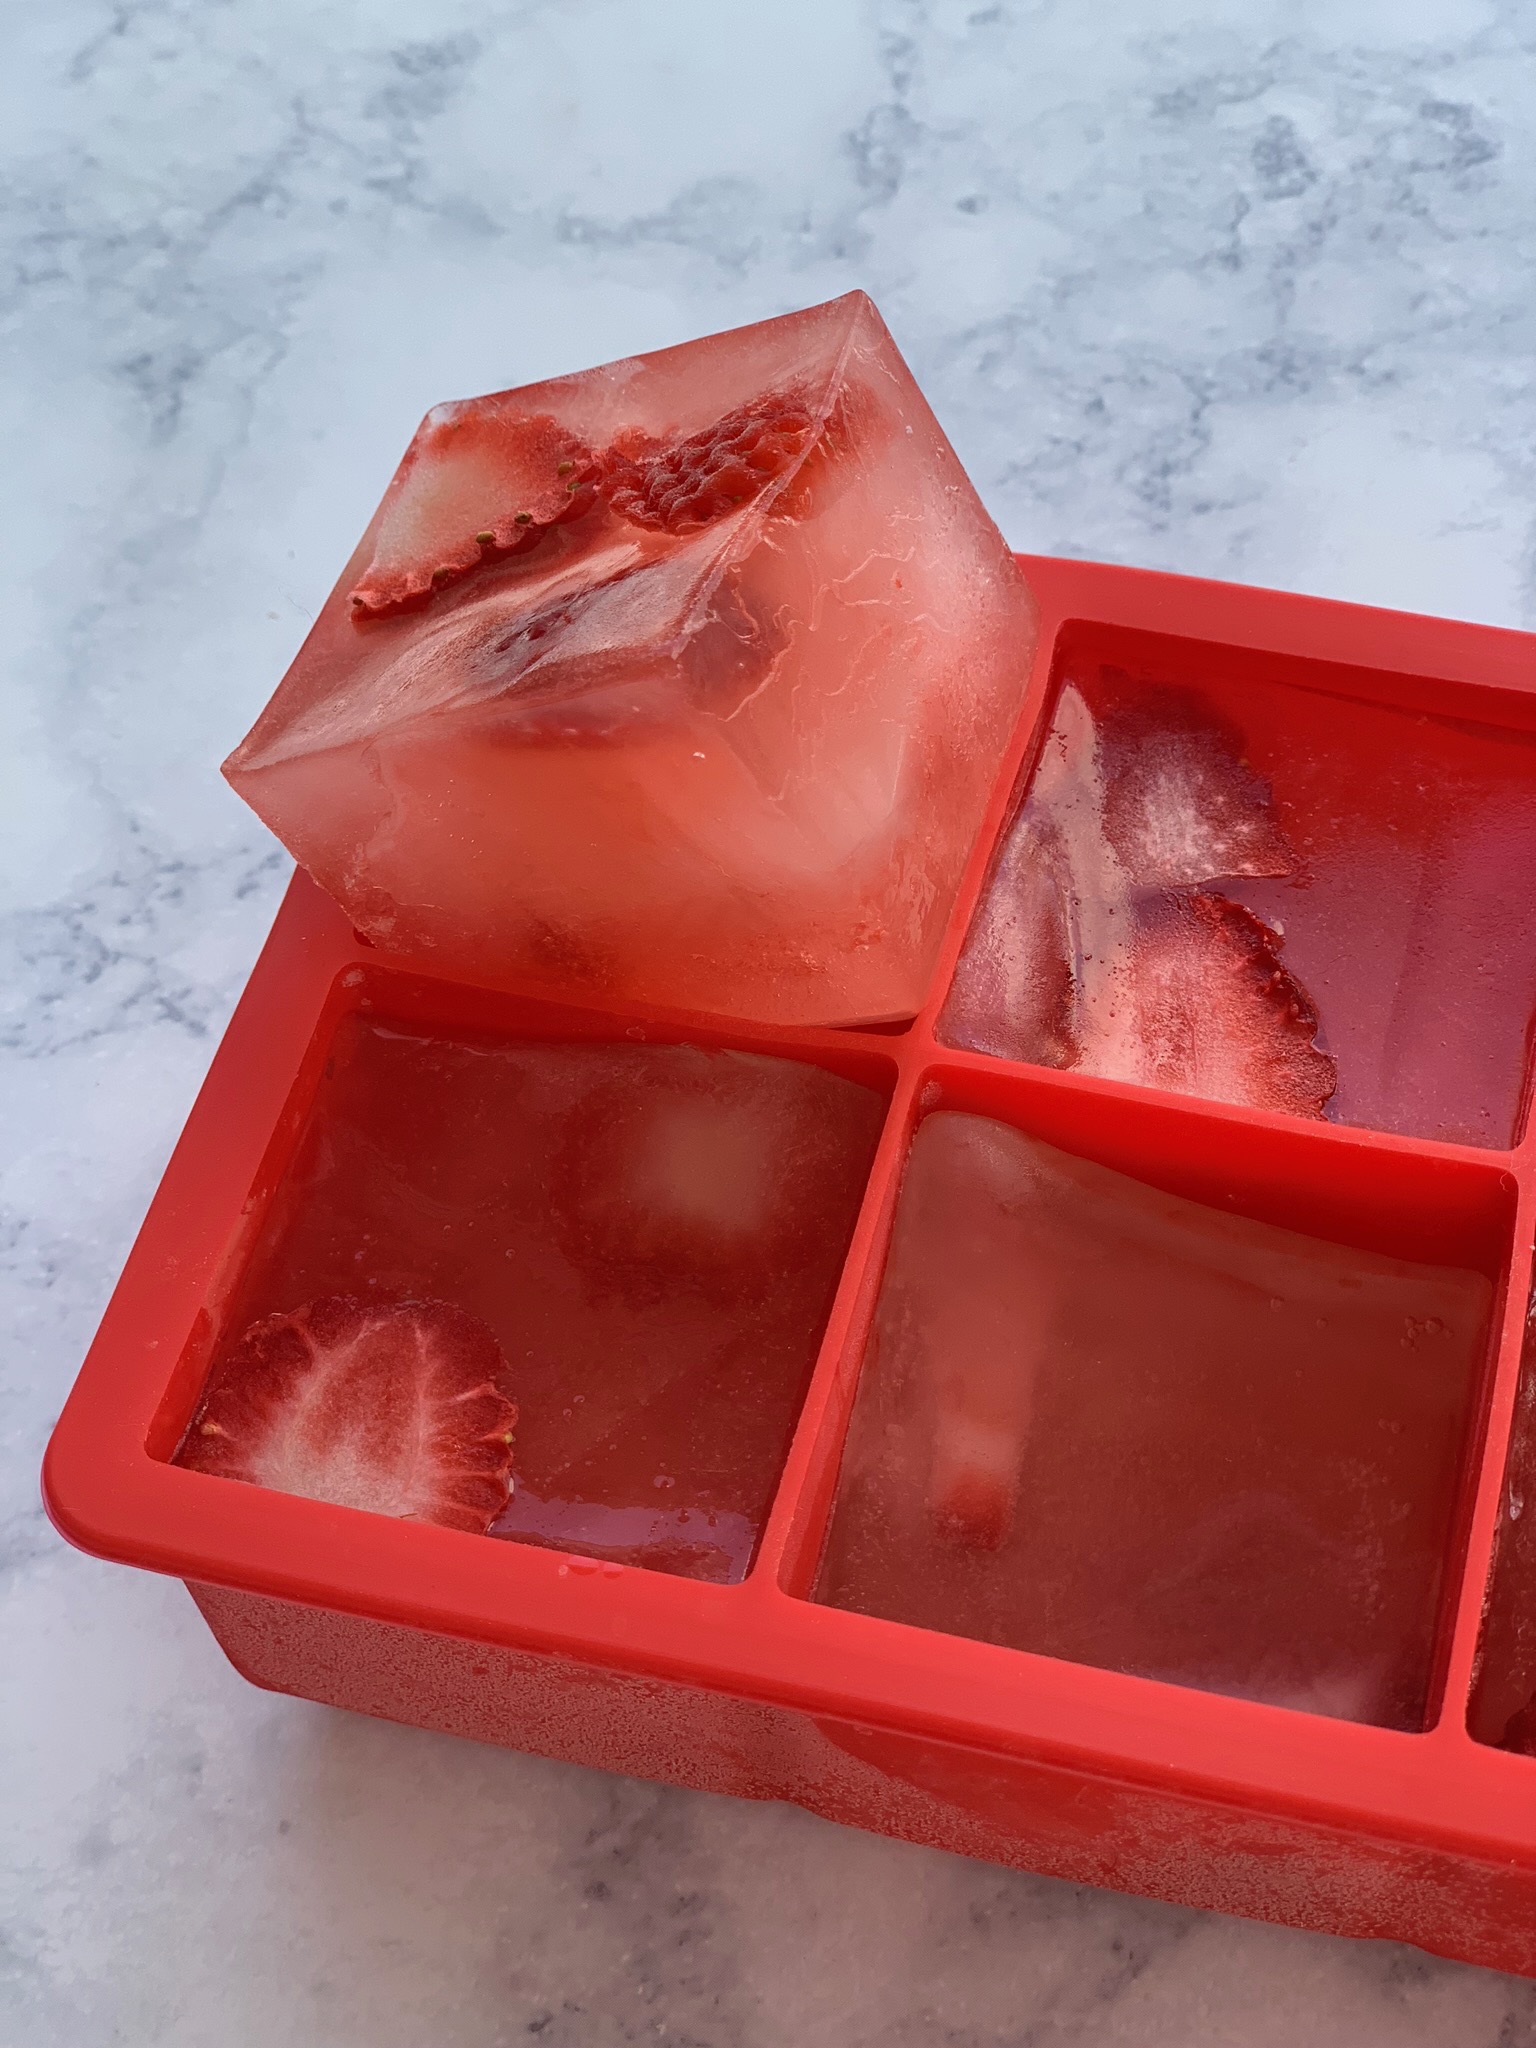 How to make sure ice cubes come out of their trays easily and